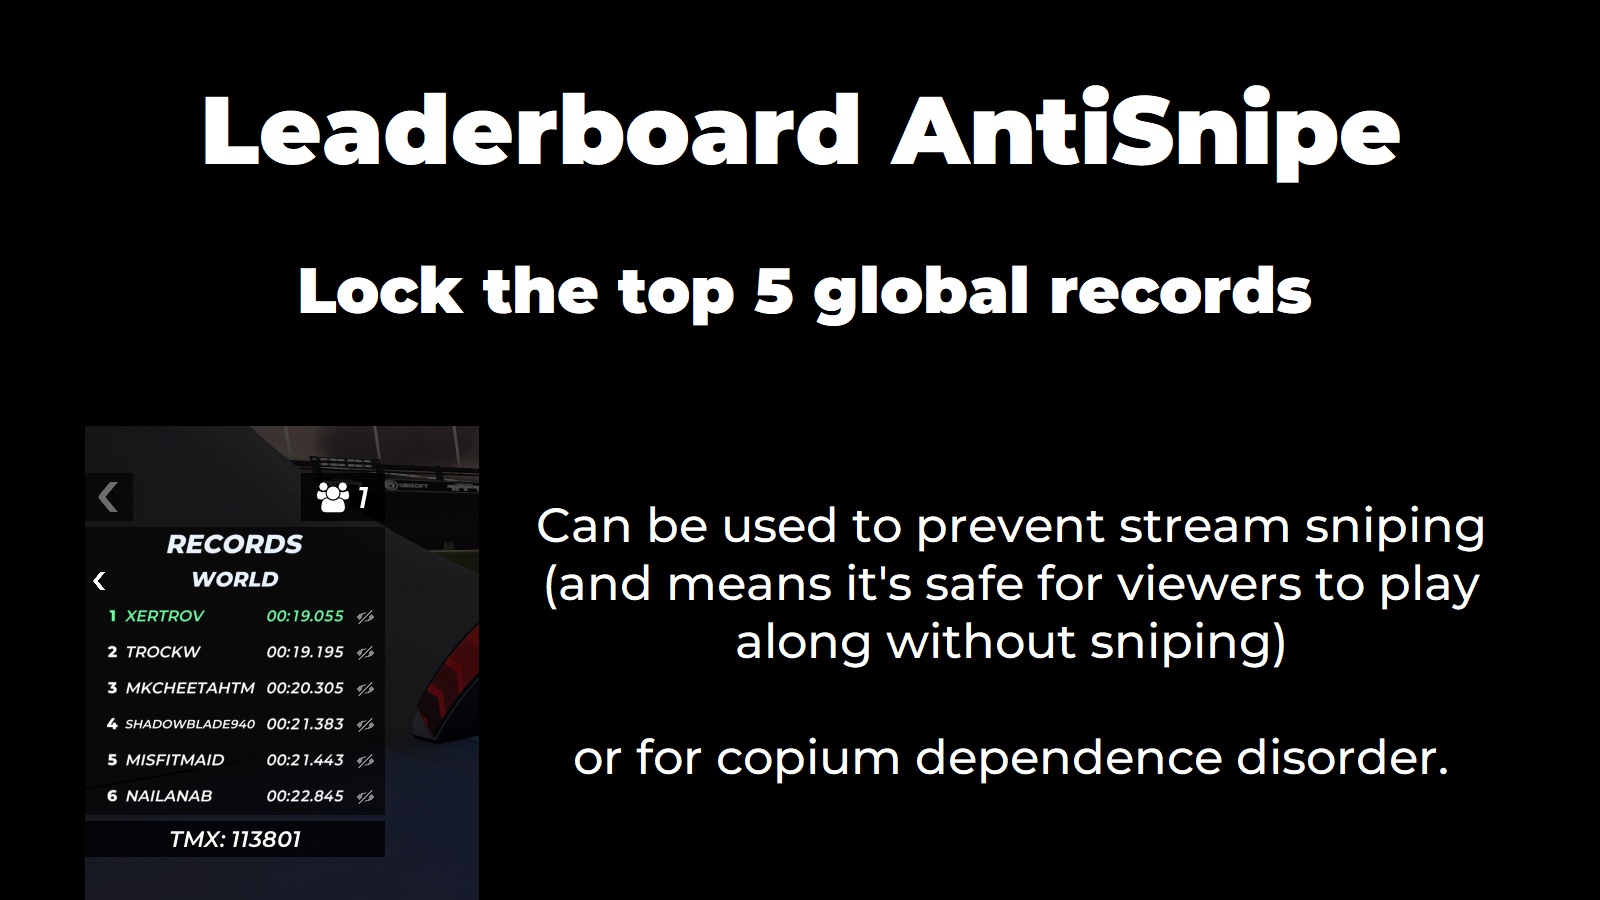 leaderboard antisnipe. lock the top 5 global records. mostly used for copium dependence disorder, but also can be used to prevent stream sniping.